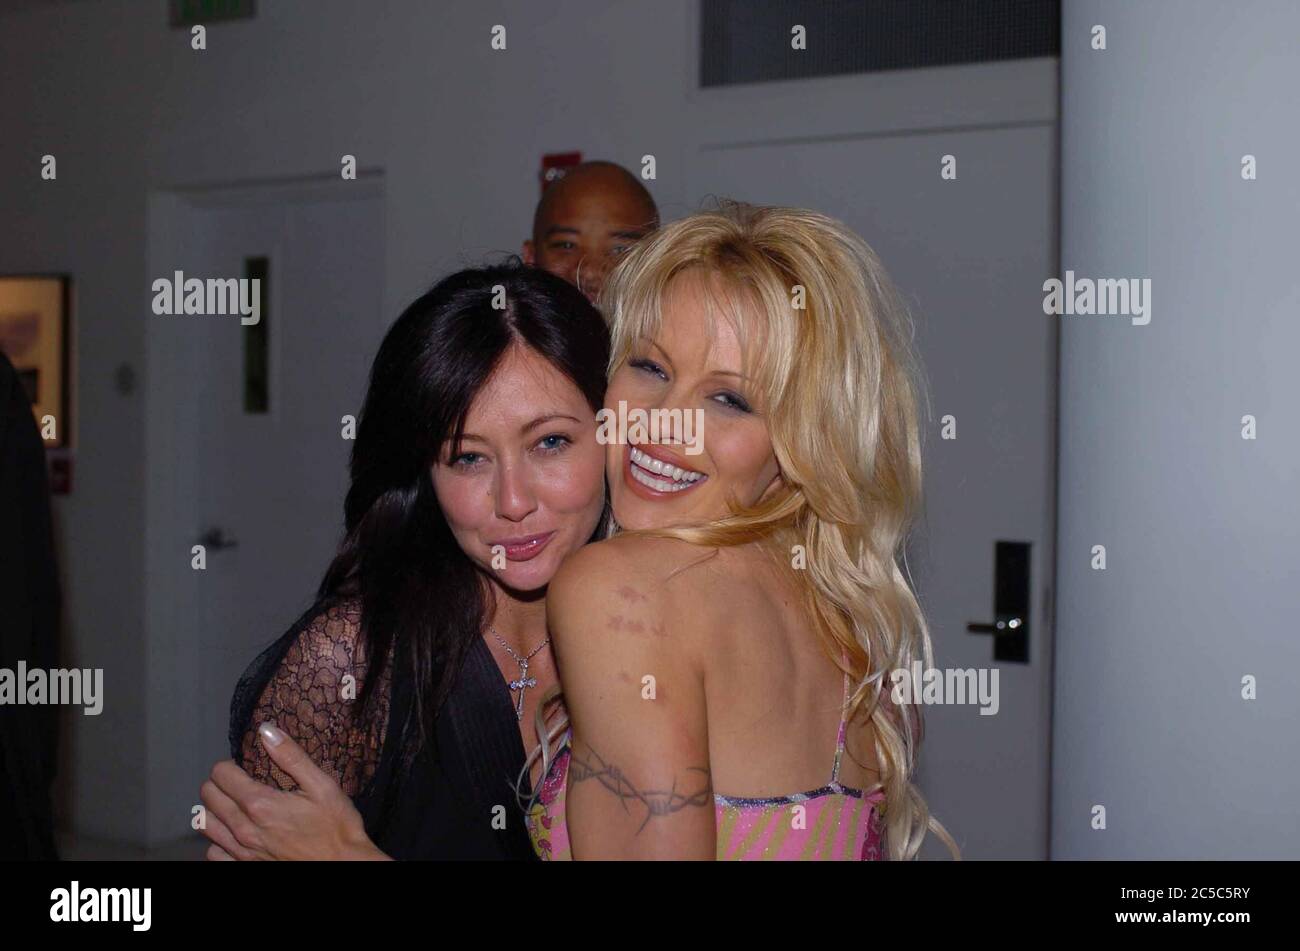 United States Of America. 19th Feb, 2004. MIAMI BEACH, FL - FEBRUARY 19: (EXCLUSIVE COVERAGE) shannen doherty, Pamela Anderson on February 19, 2004 in Miami, Florida People: shannen doherty, Pamela Anderson Credit: Storms Media Group/Alamy Live News Stock Photo